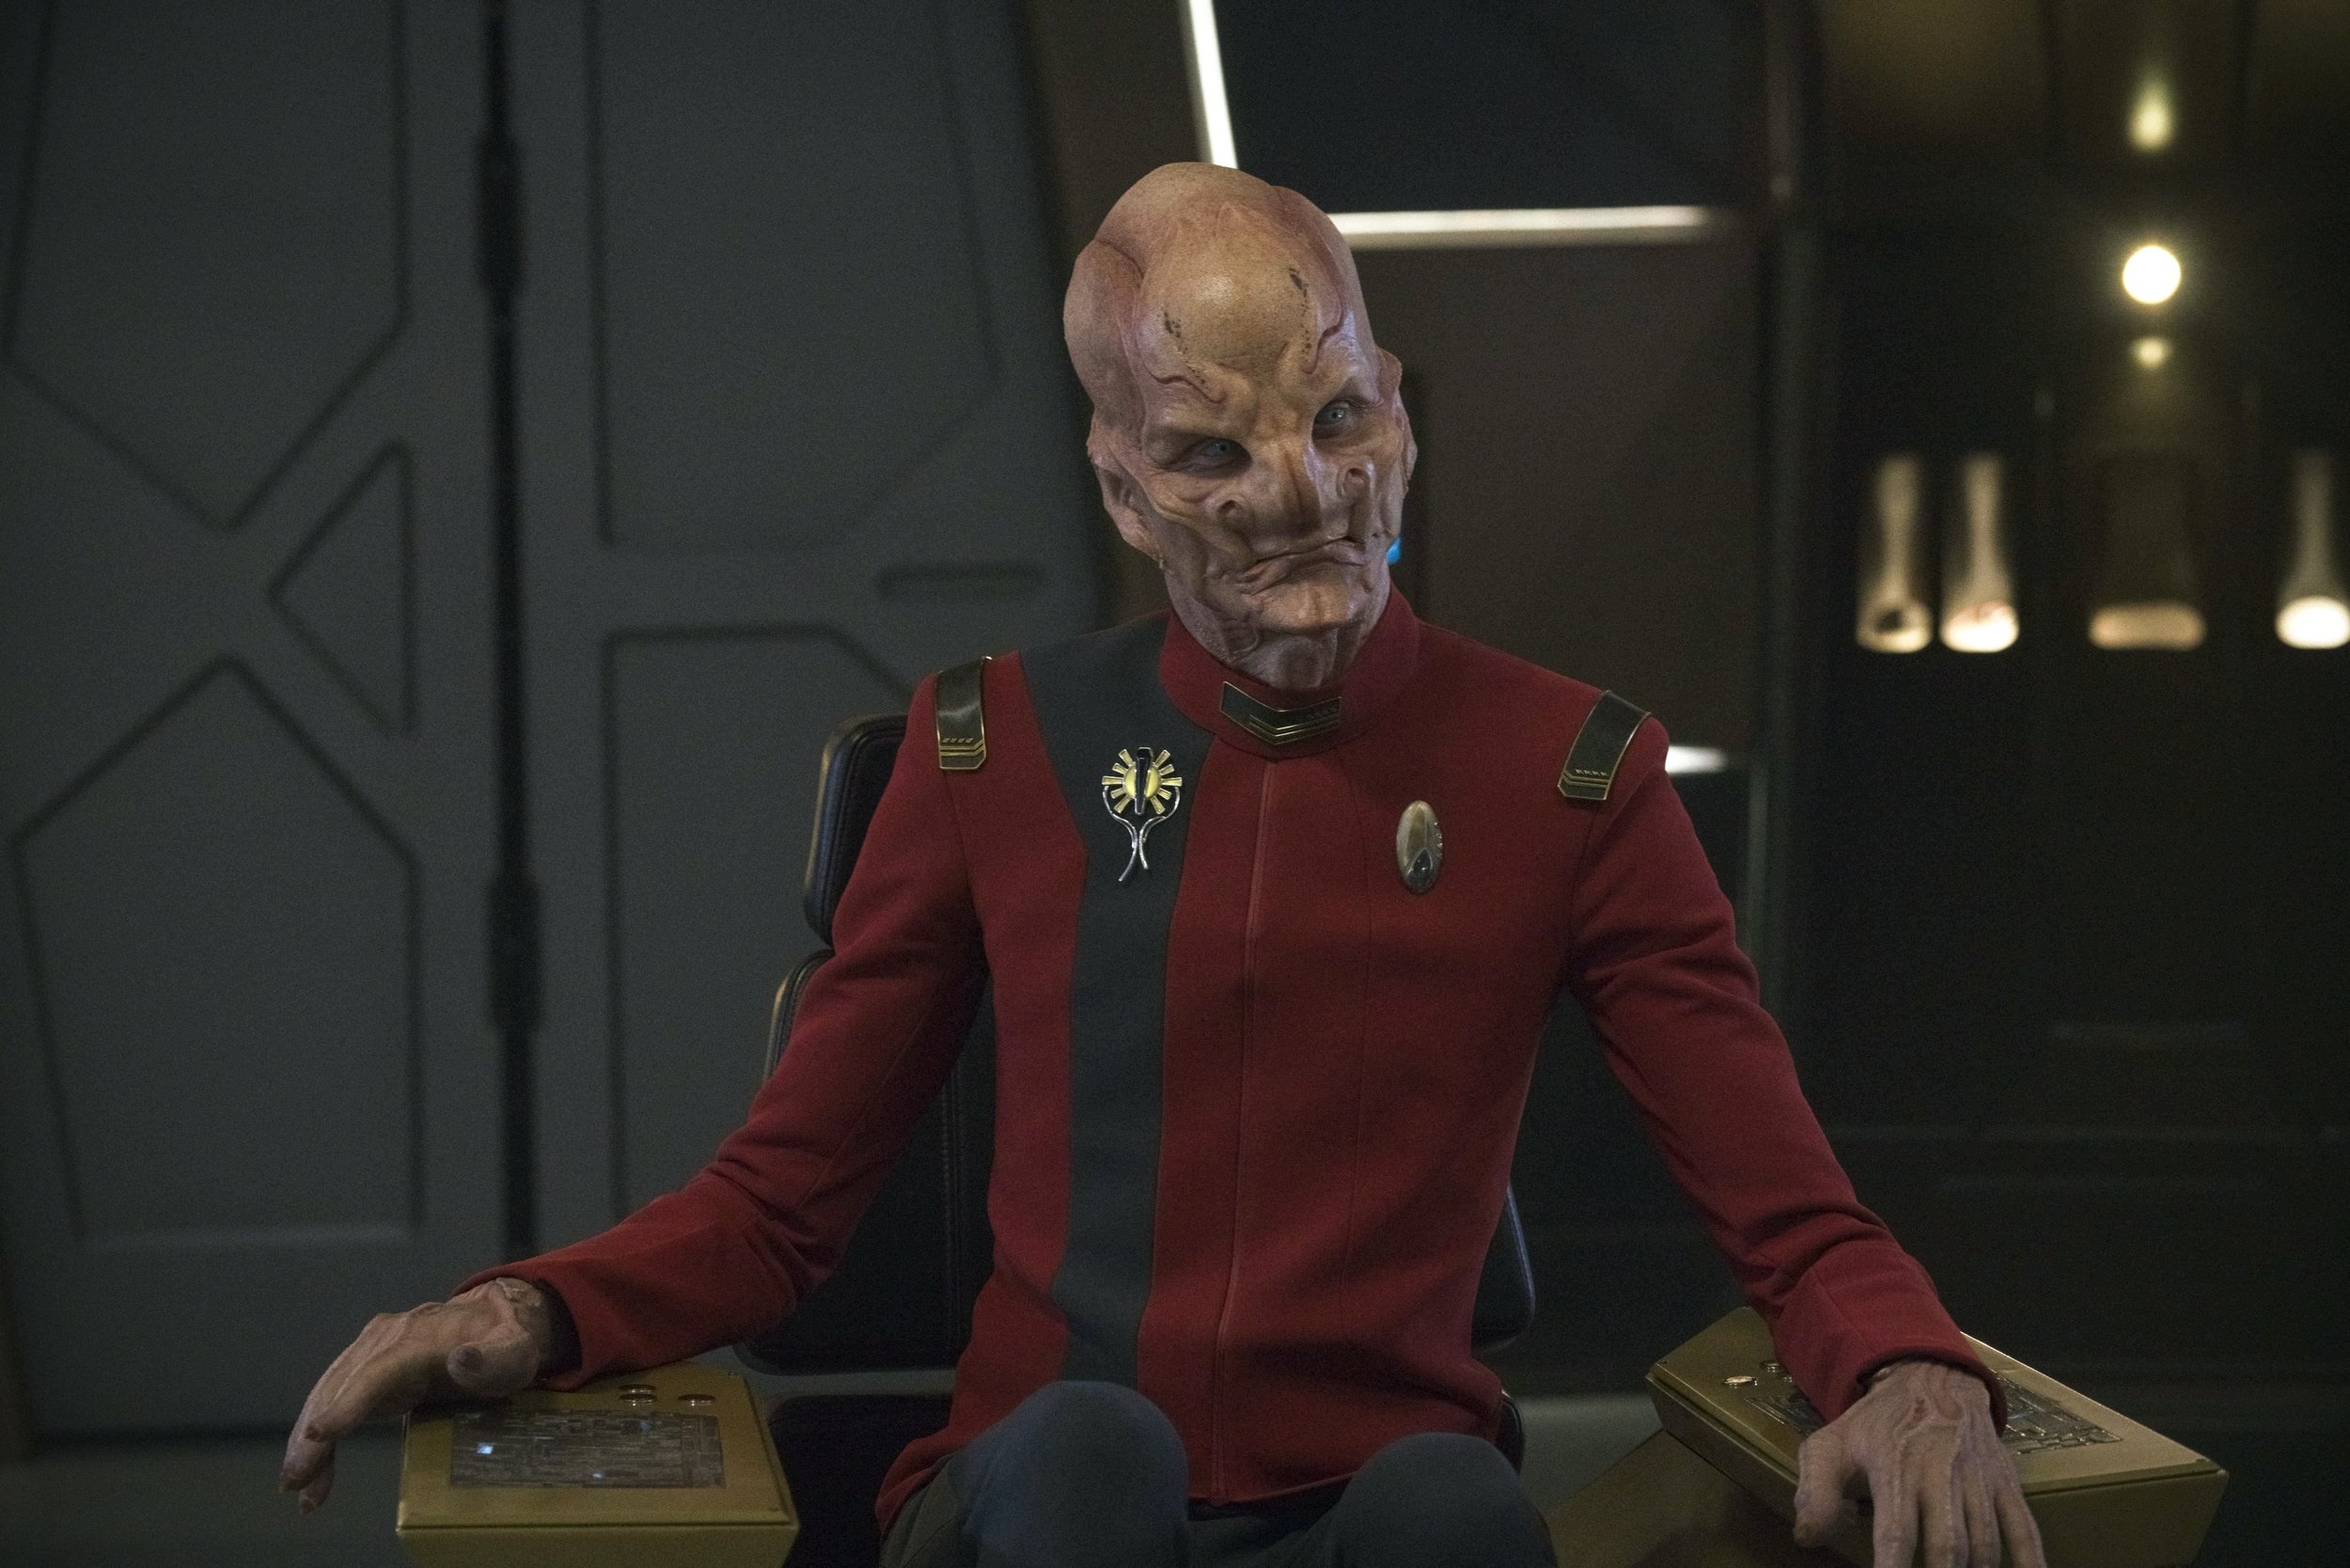   Pictured: Doug Jones as Saru of the Paramount+ original series STAR TREK: DISCOVERY. Photo Cr: Michael Gibson/Paramount+ (C) 2021 CBS Interactive. All Rights Reserved.  